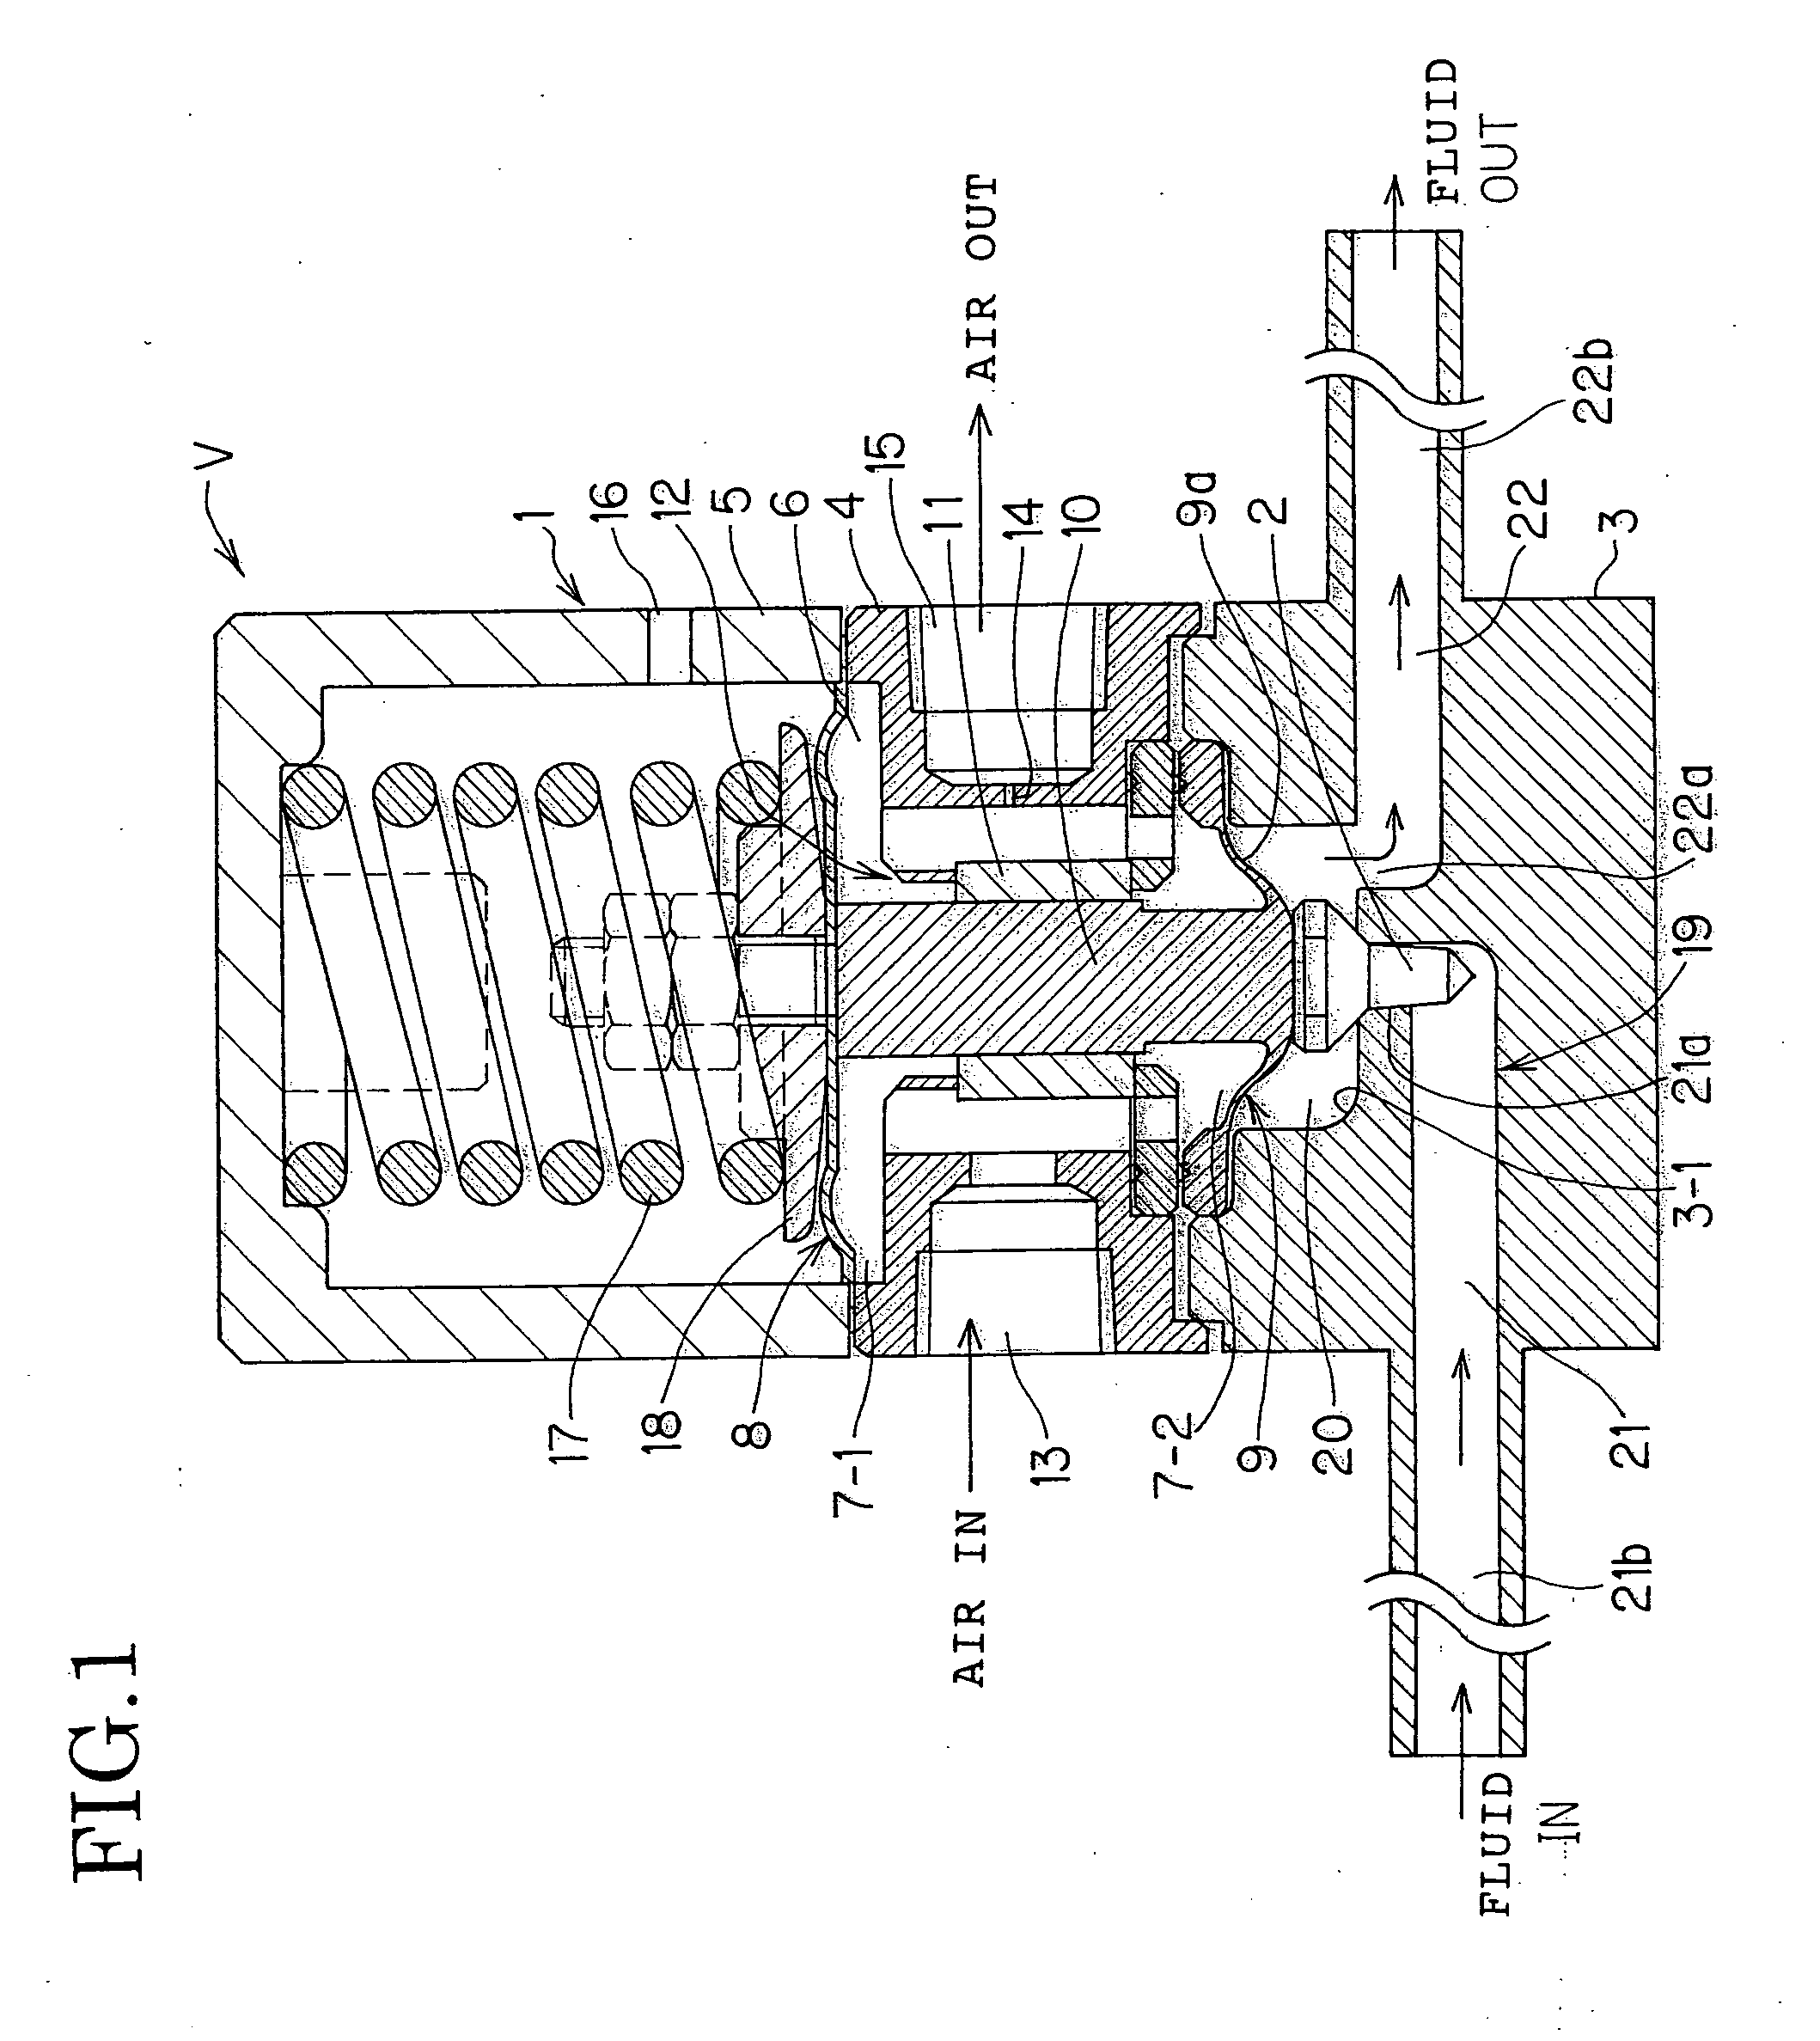 Flow control valve and flow control device